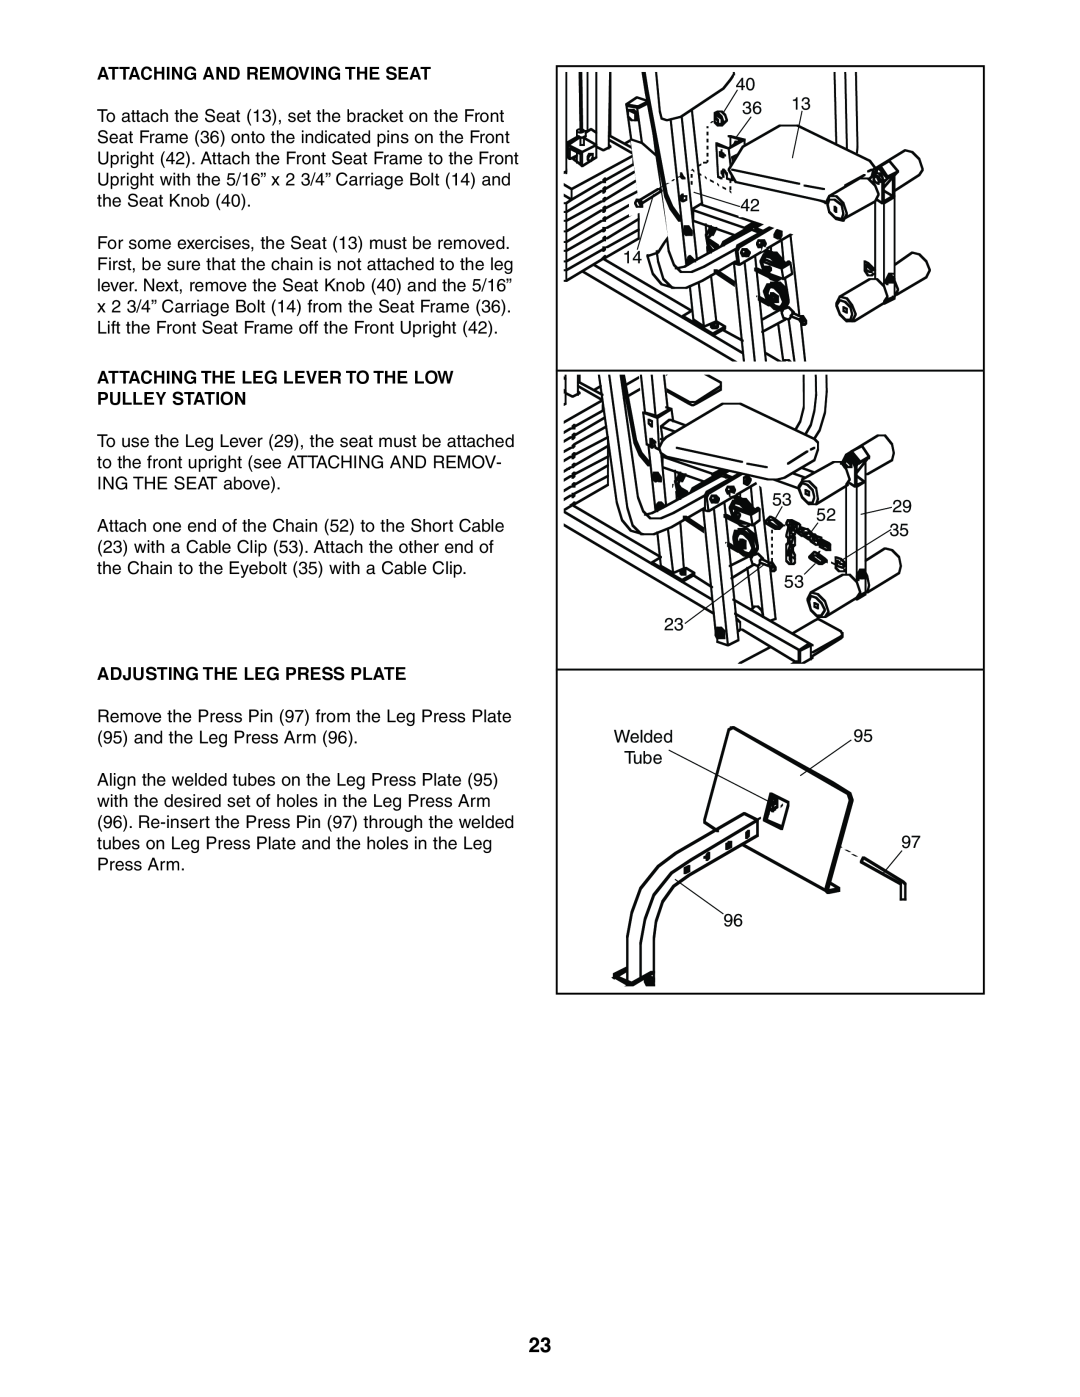 Weider 831.159380 user manual Attaching And Removing The Seat, Attaching The Leg Lever To The Low Pulley Station 